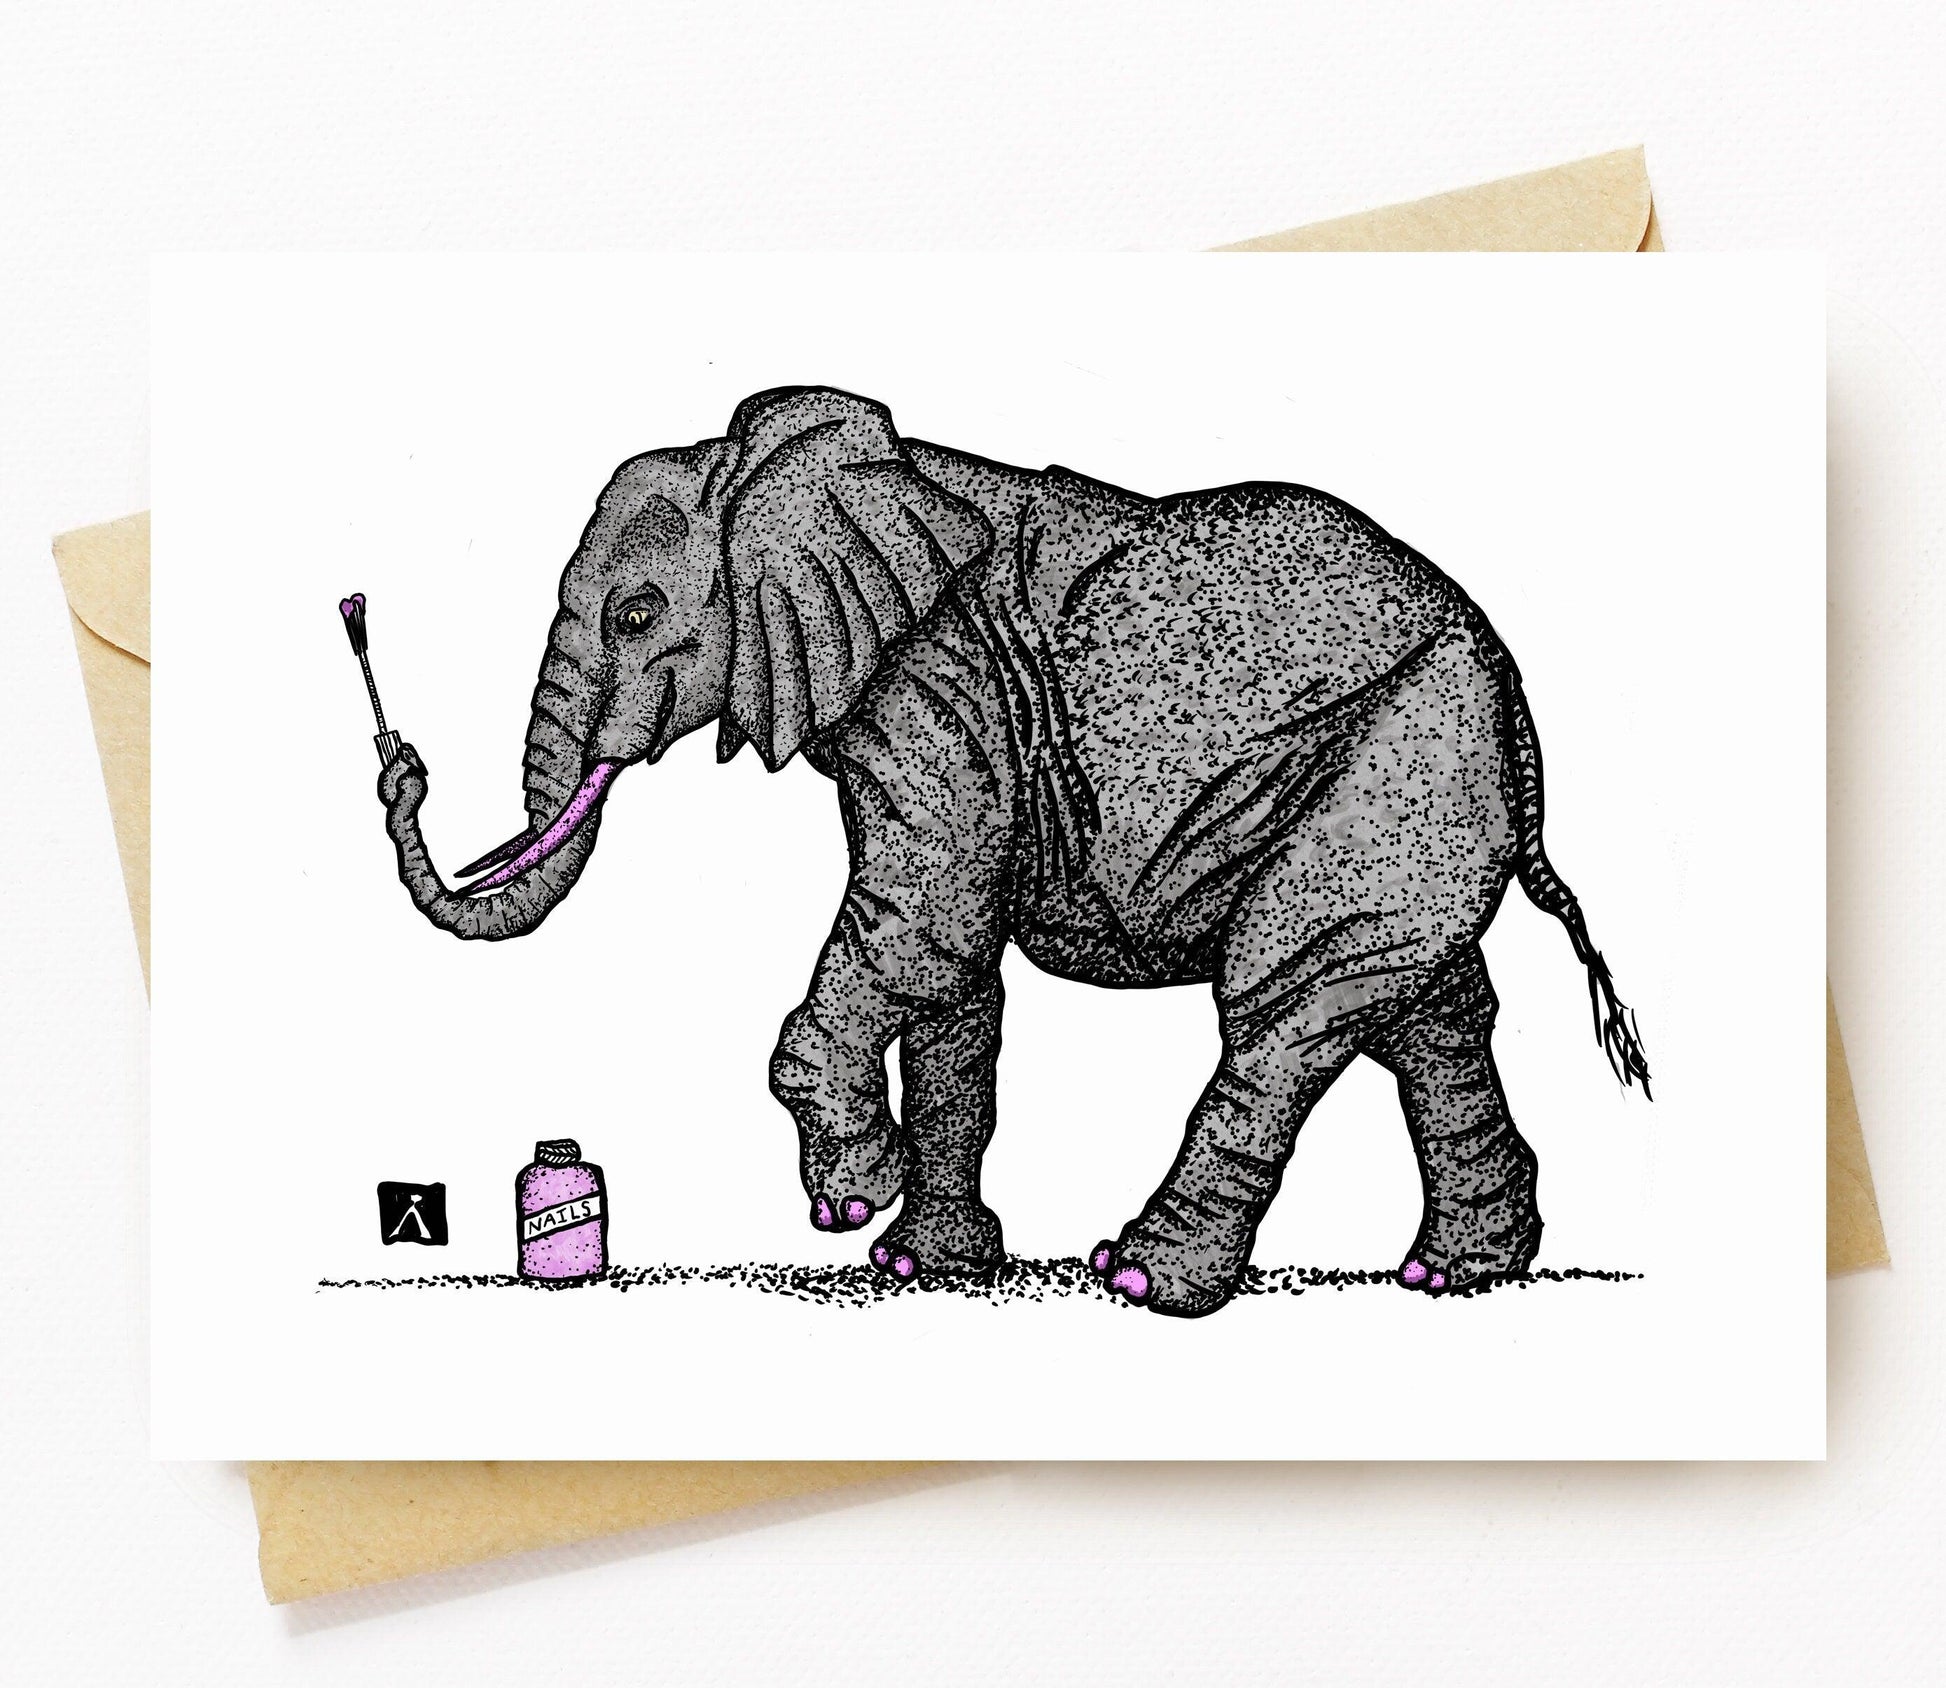 BellavanceInk: Greeting Card With Elephant Painting Their Nails Pen & Ink Watercolor Illustration 5 x 7 Inches - BellavanceInk